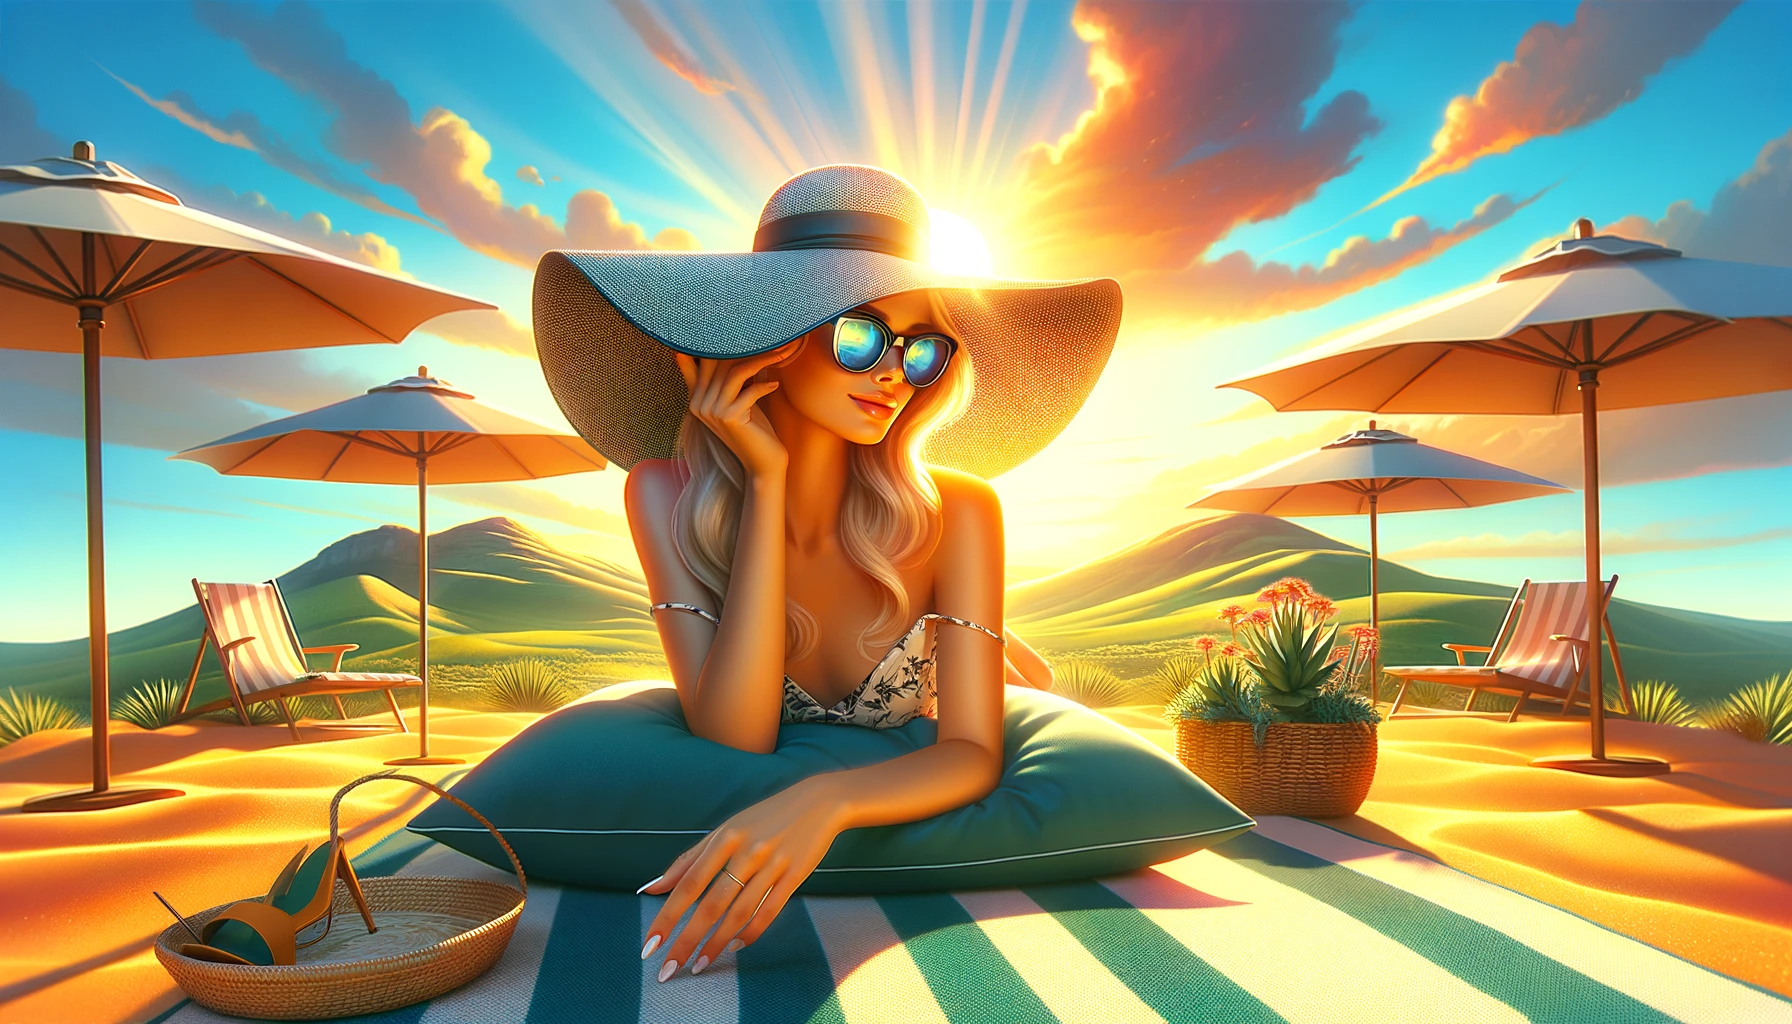 Image illustration how Hats and Shades effects face tanning